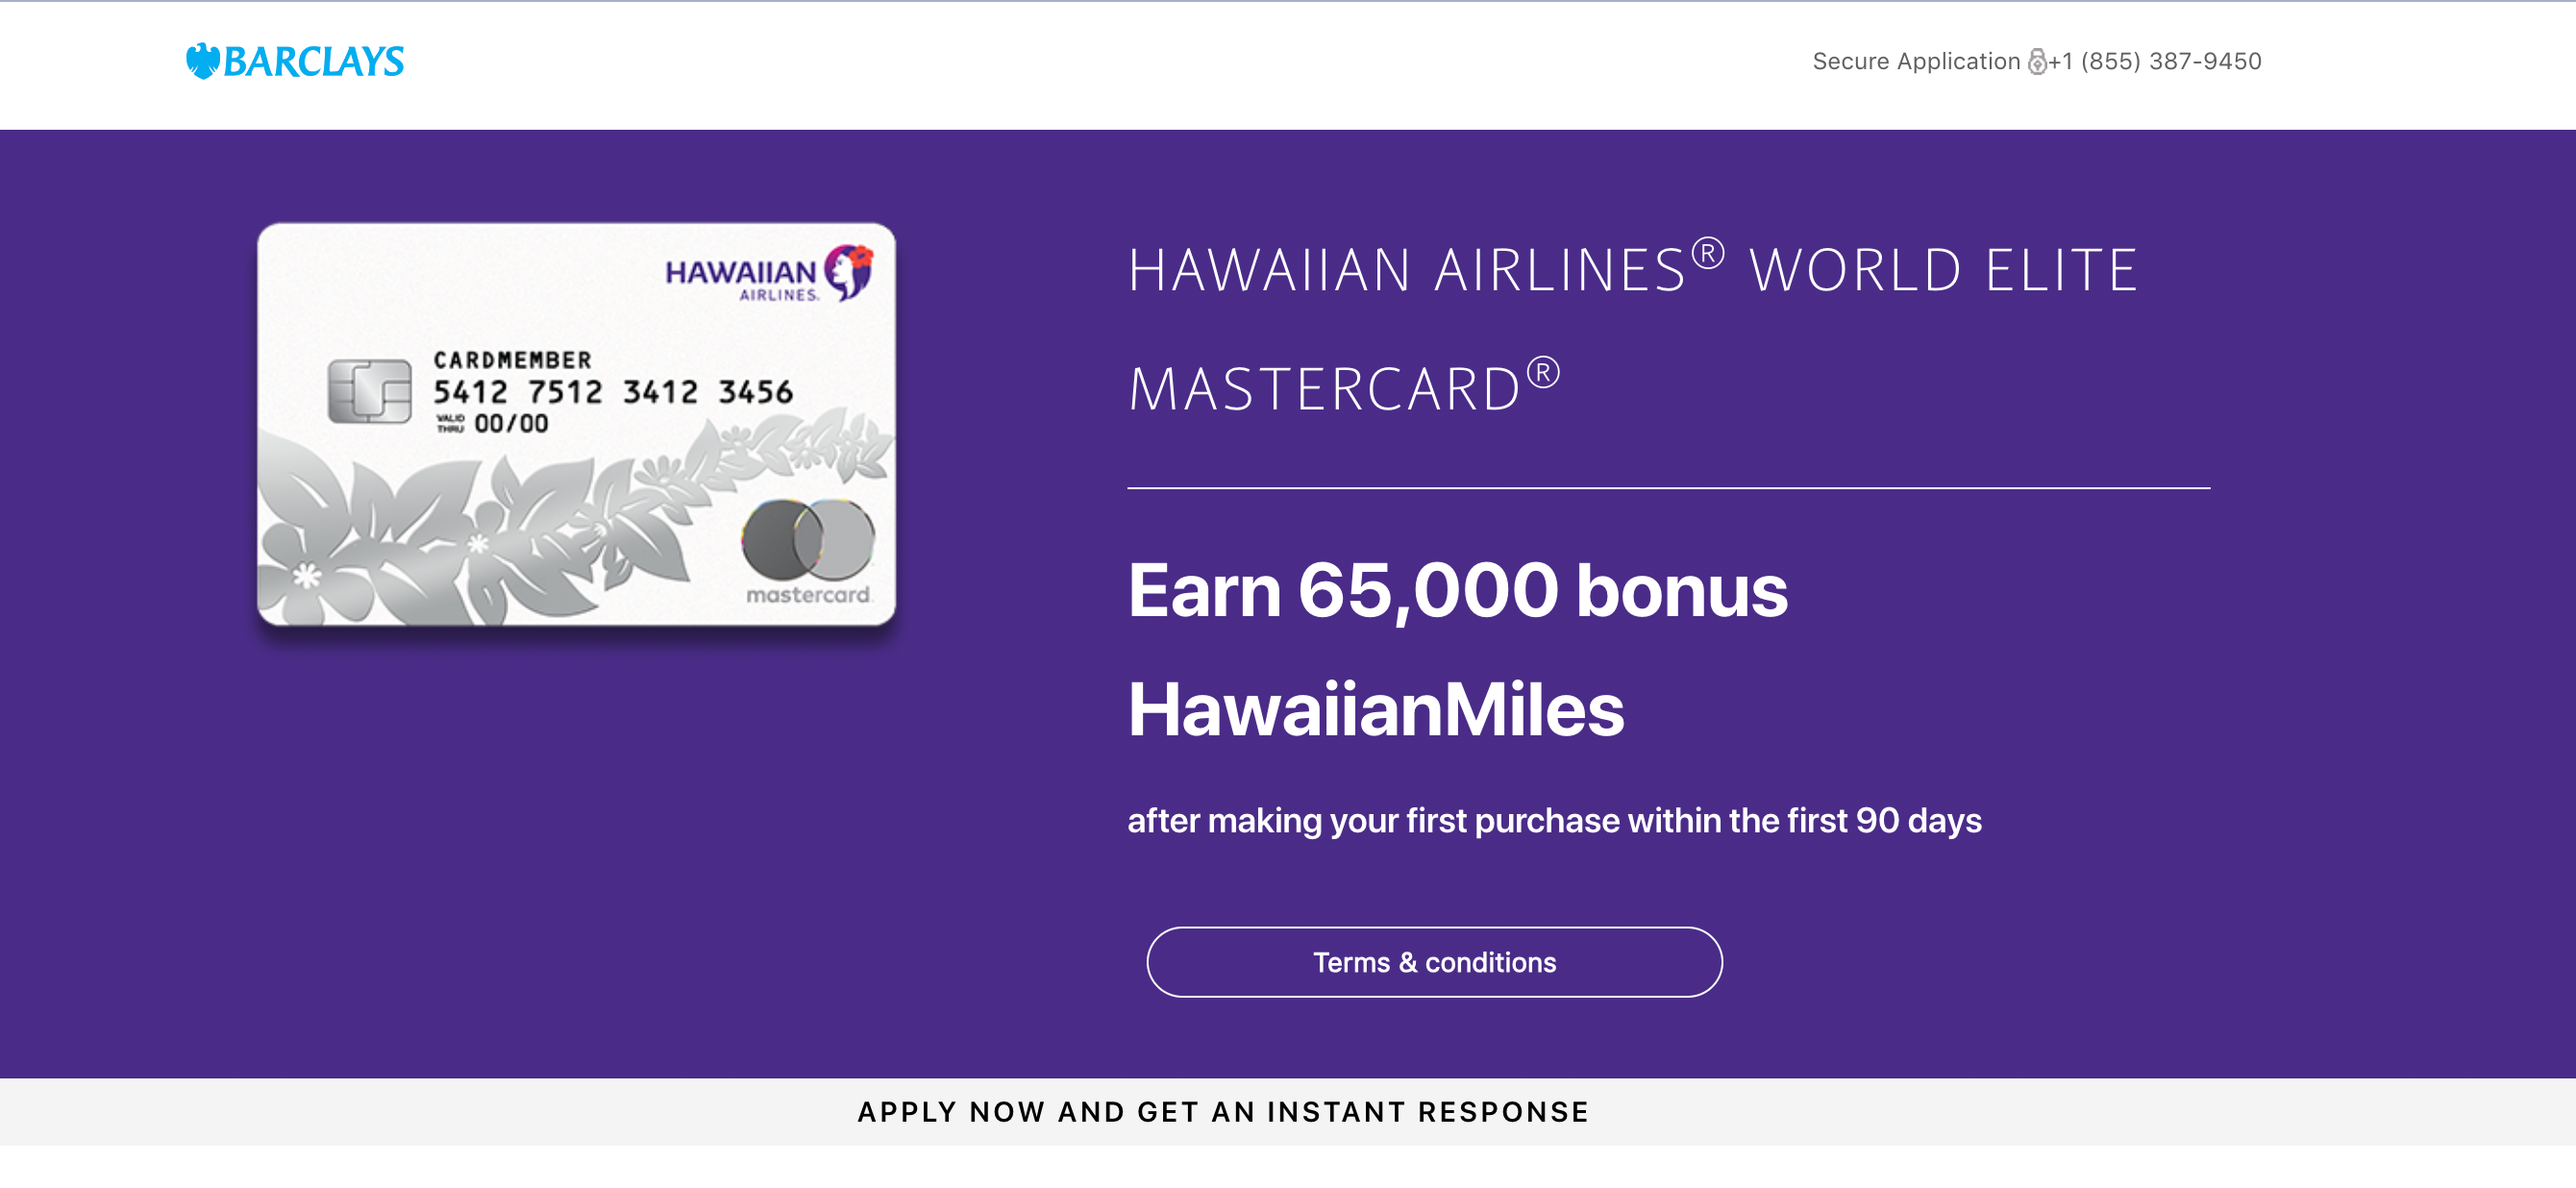 Hawaiian Airlines World Elite Mastercard signup offer. BARCLAYS